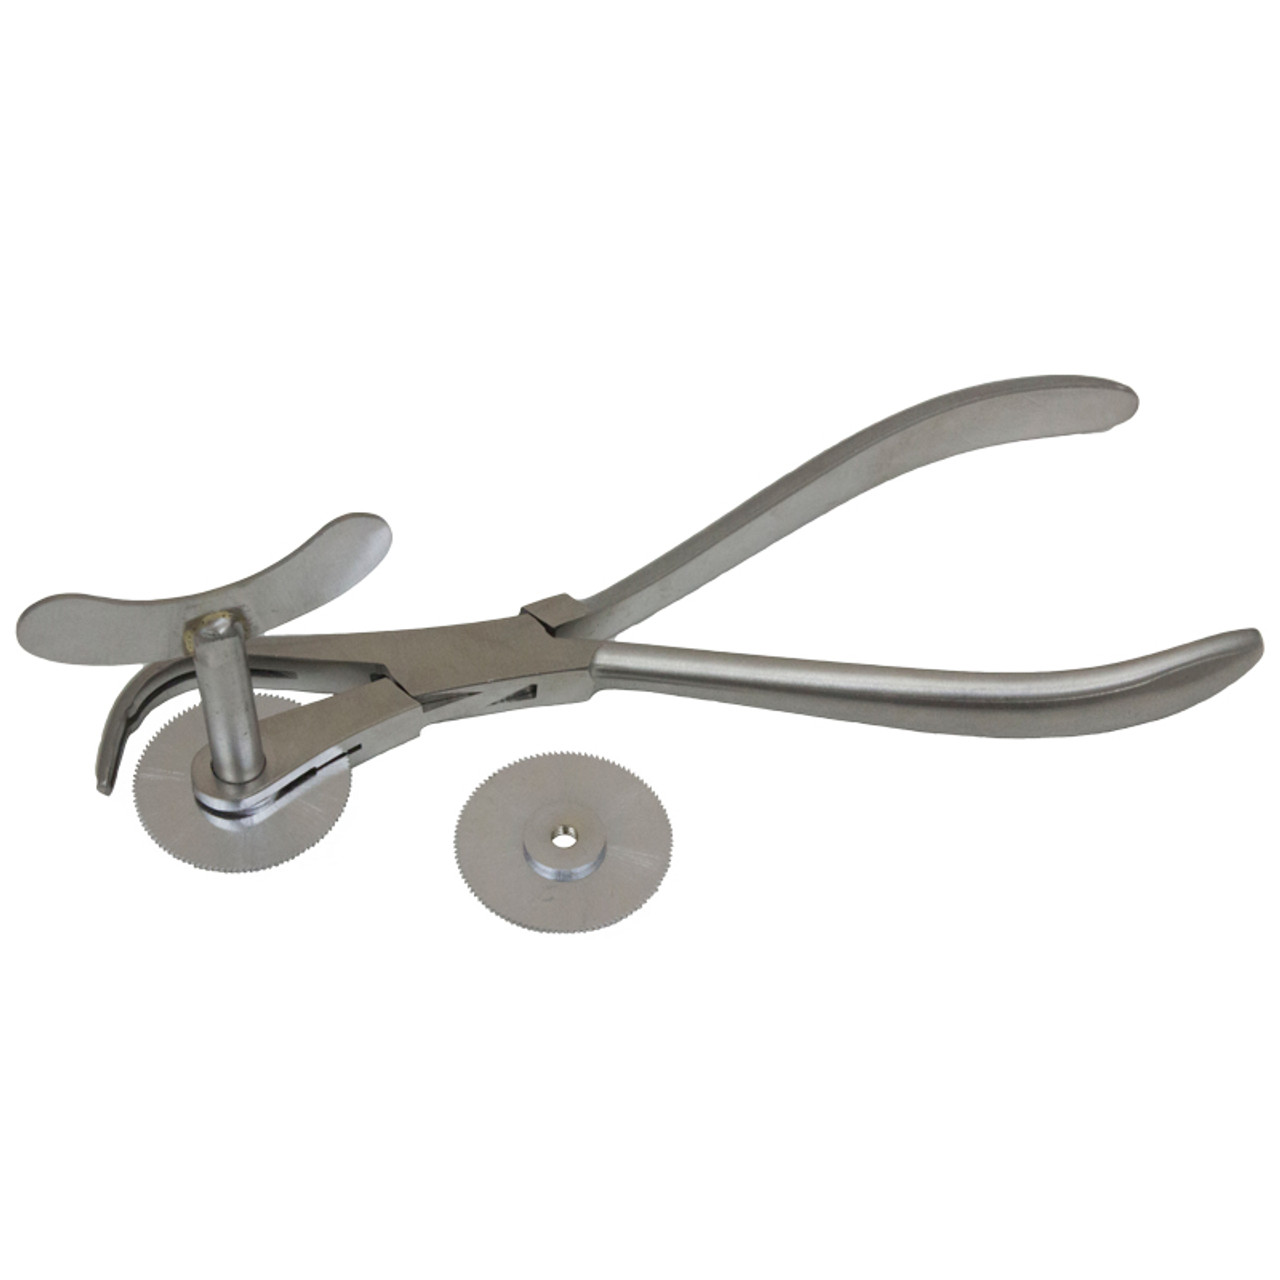 Watchmakers and Jewelers End Cutter Plier | Esslinger